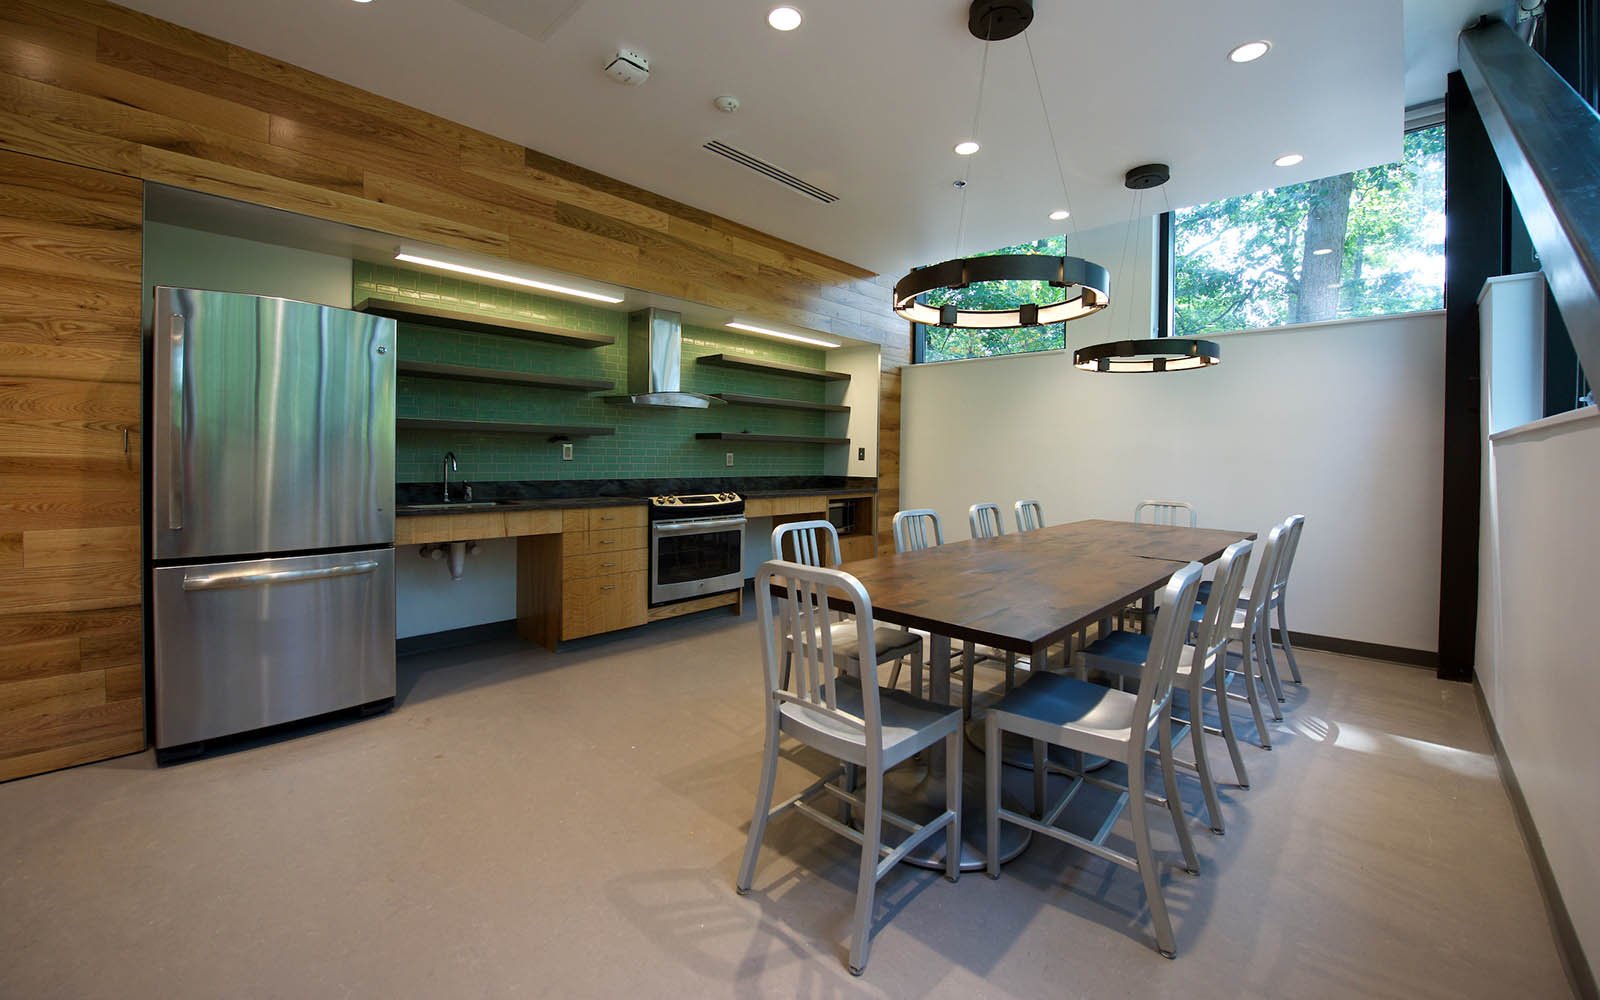 Kitchen space with table in the middle of the room and large metal fridge to the left.